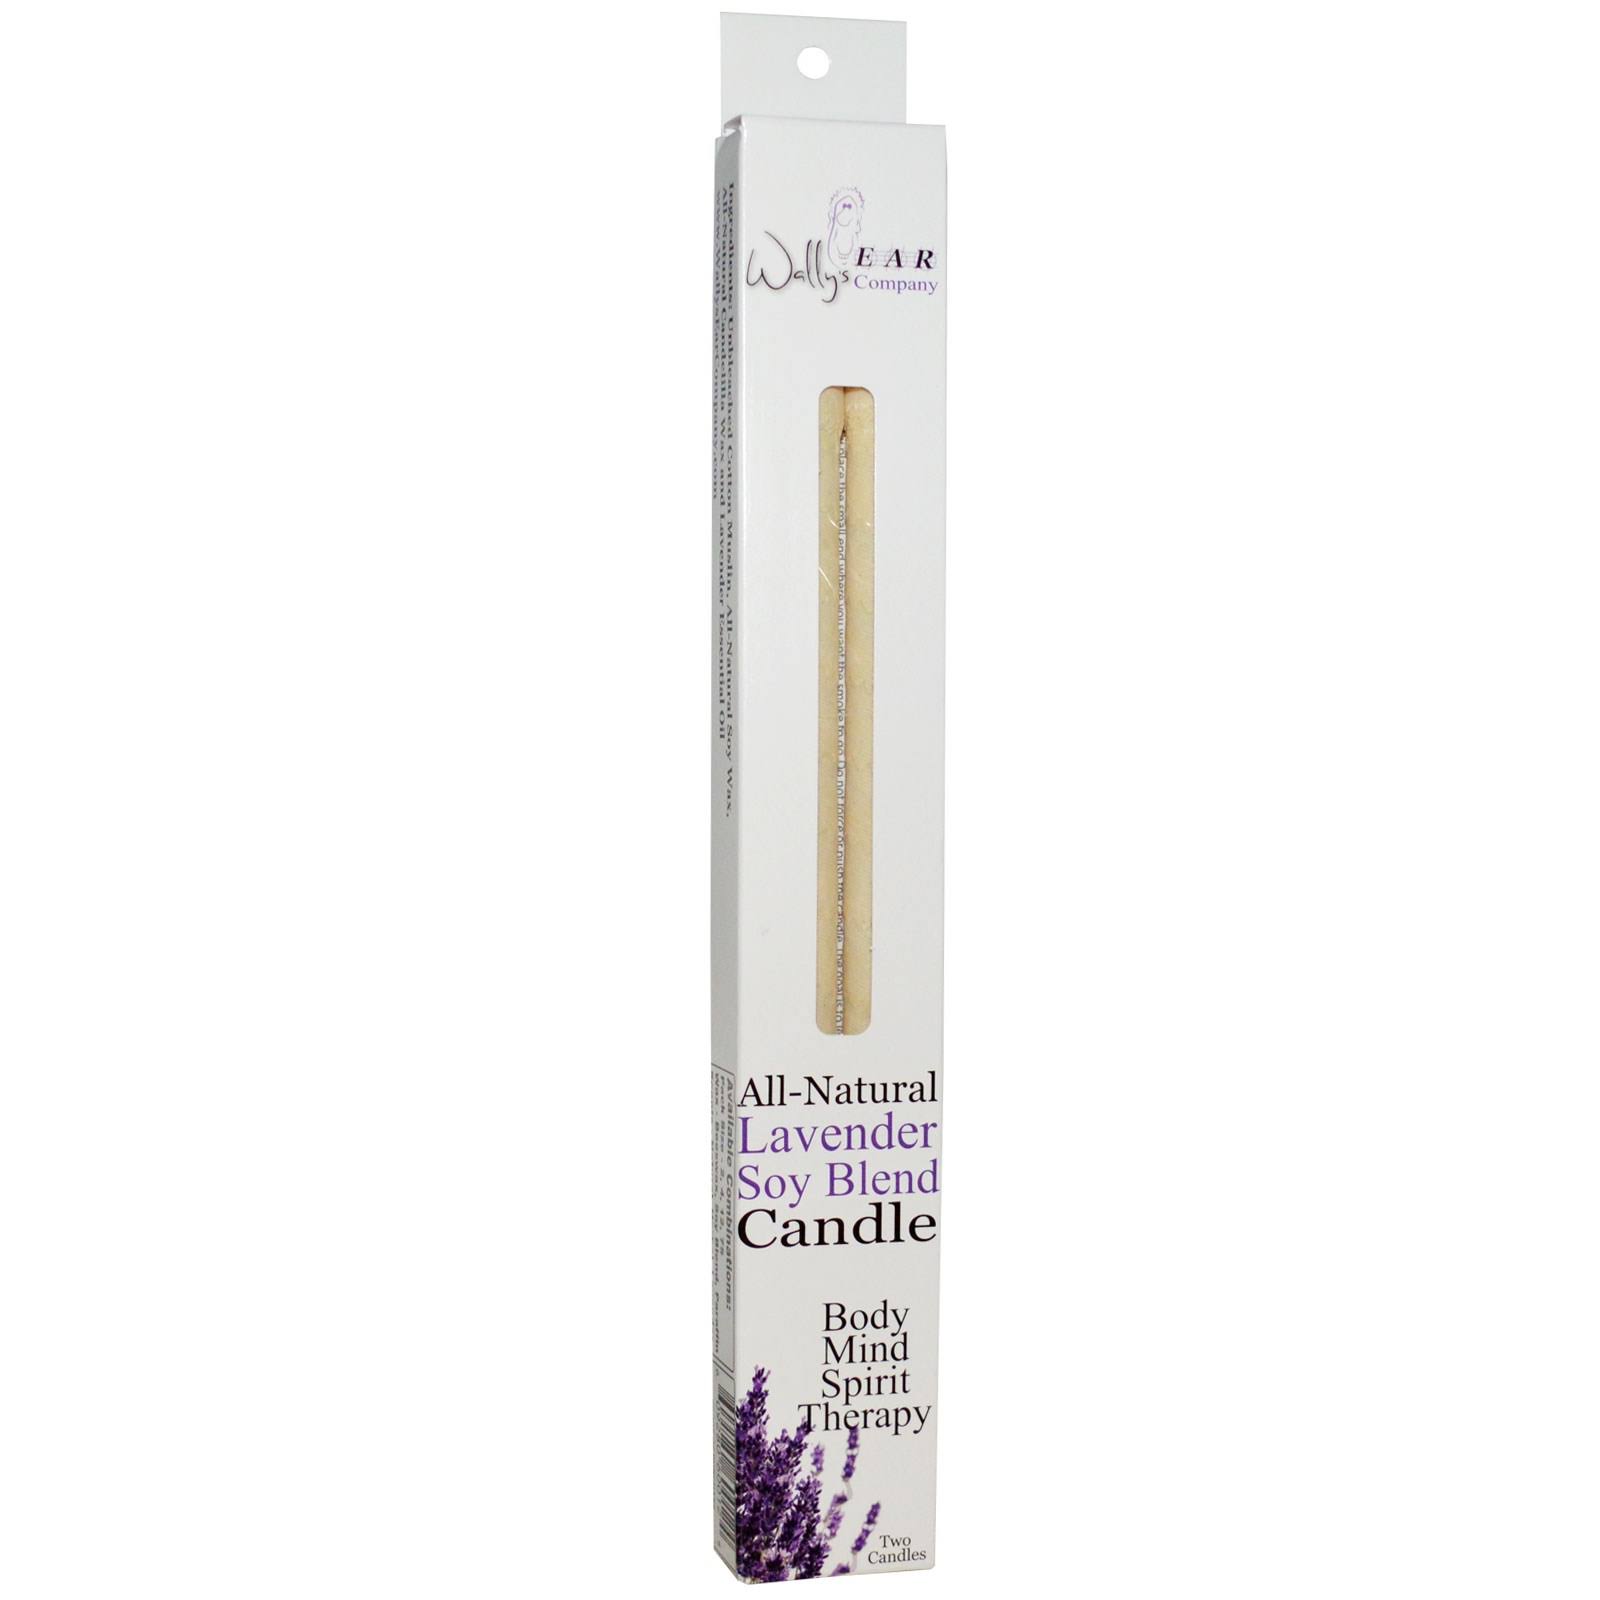 Wallys Natural Products 0115881 Paraffin Ear Candles - Lavender, 2pcs